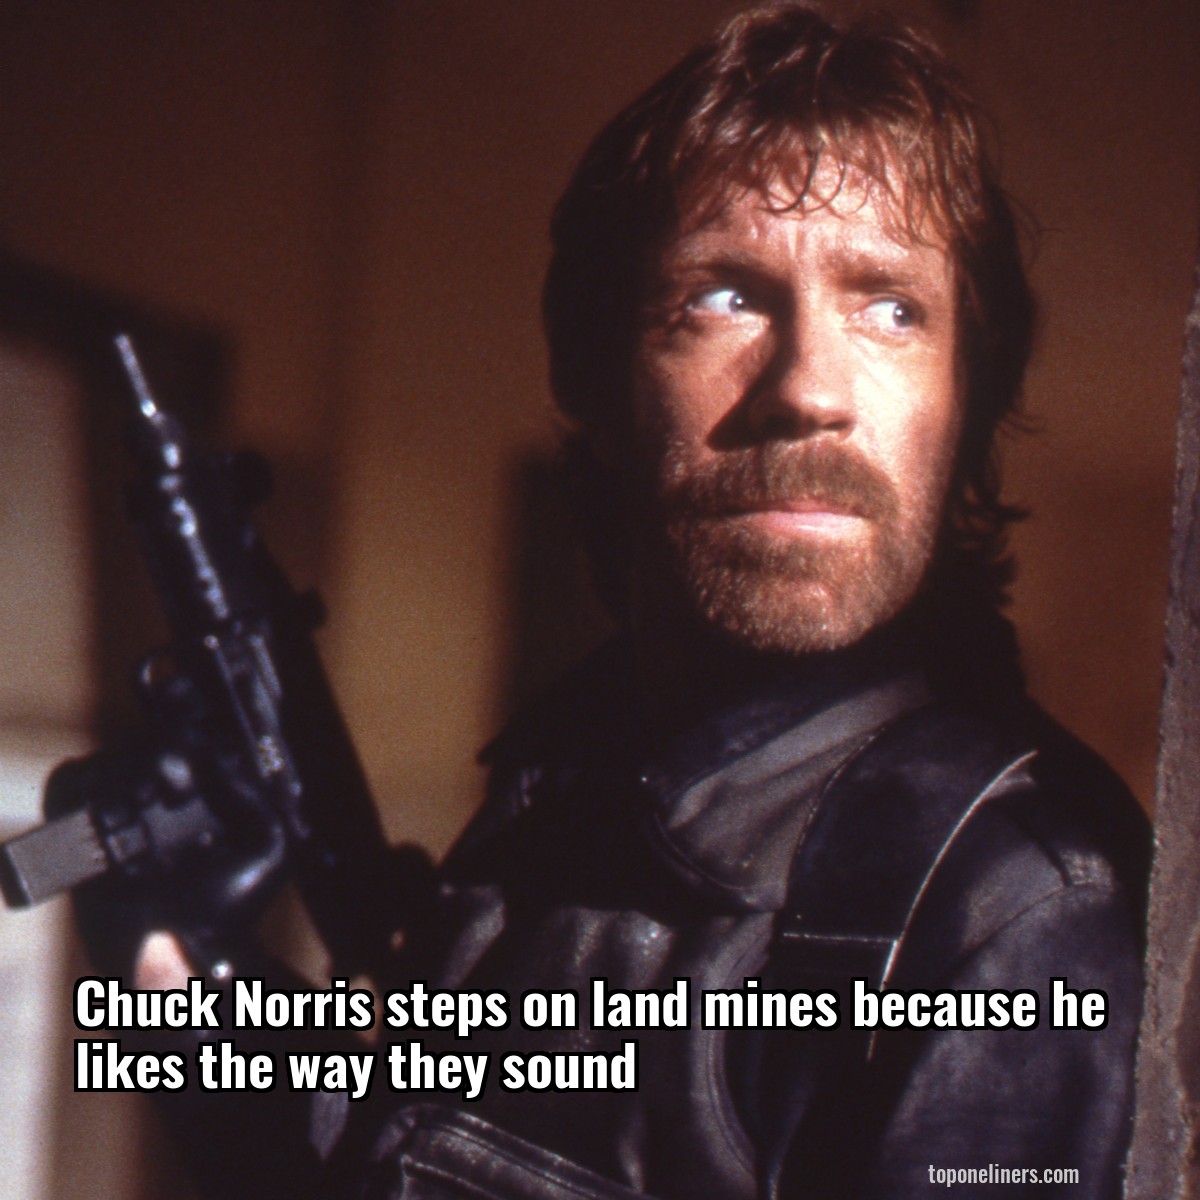 Chuck Norris steps on land mines because he likes the way they sound